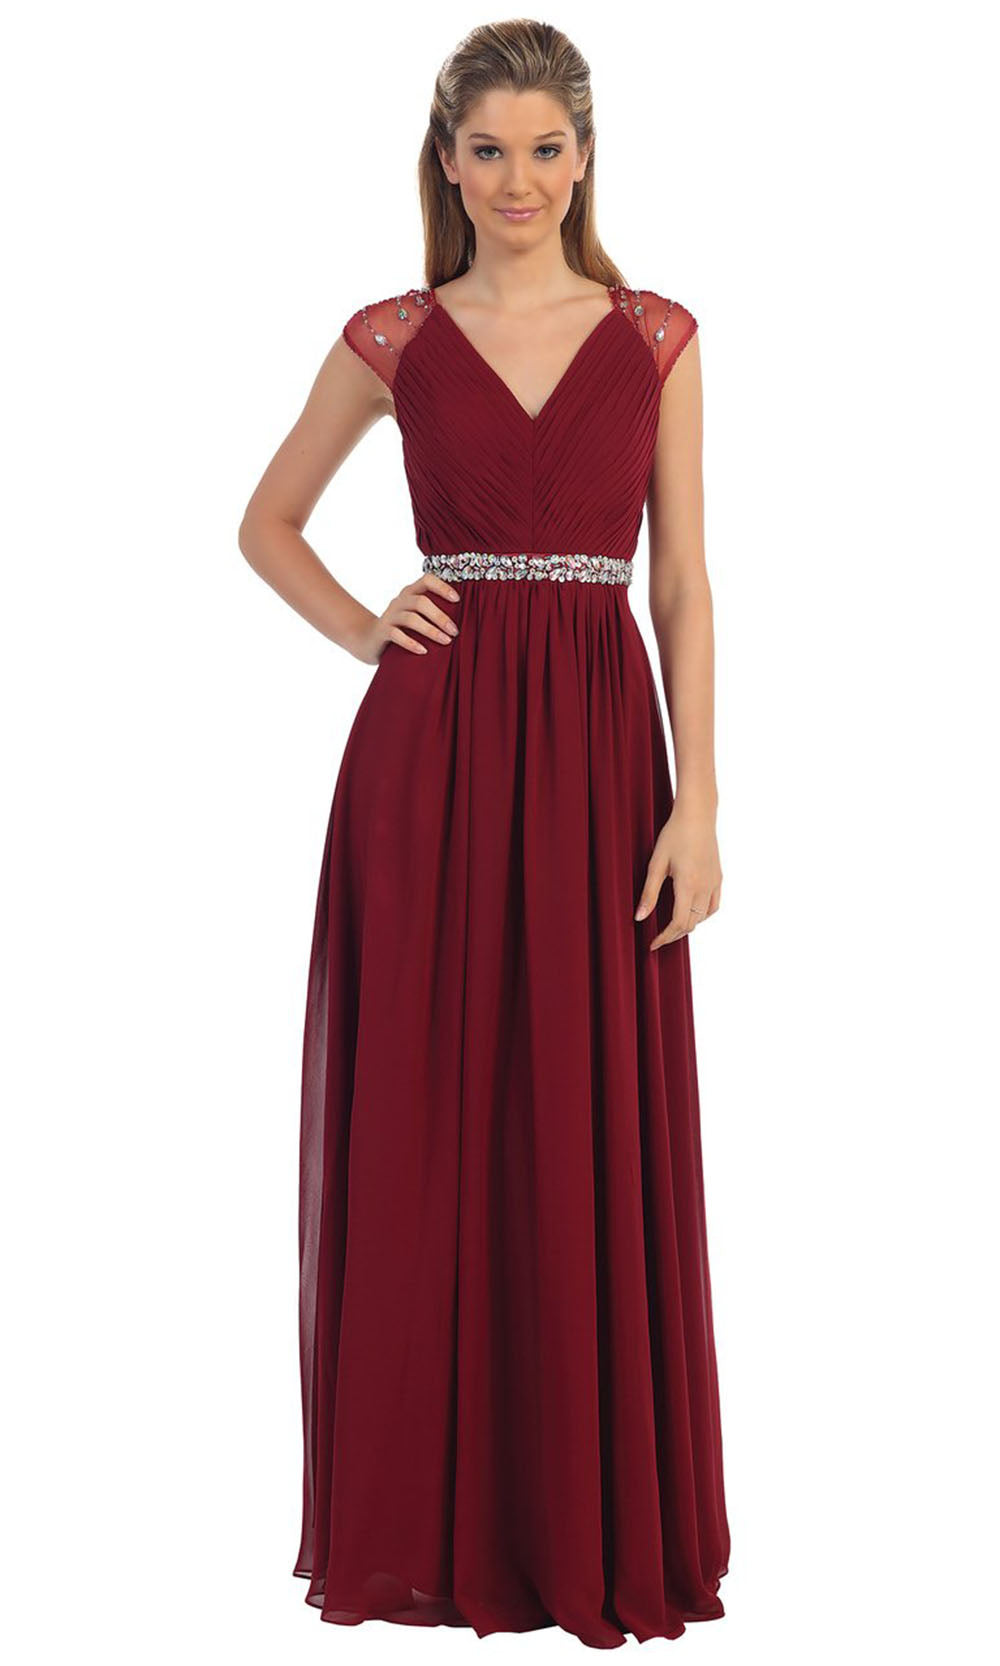 Dancing Queen - 9182 Illusion Sleeve Pleated Chiffon A-Line Gown In Burgundy